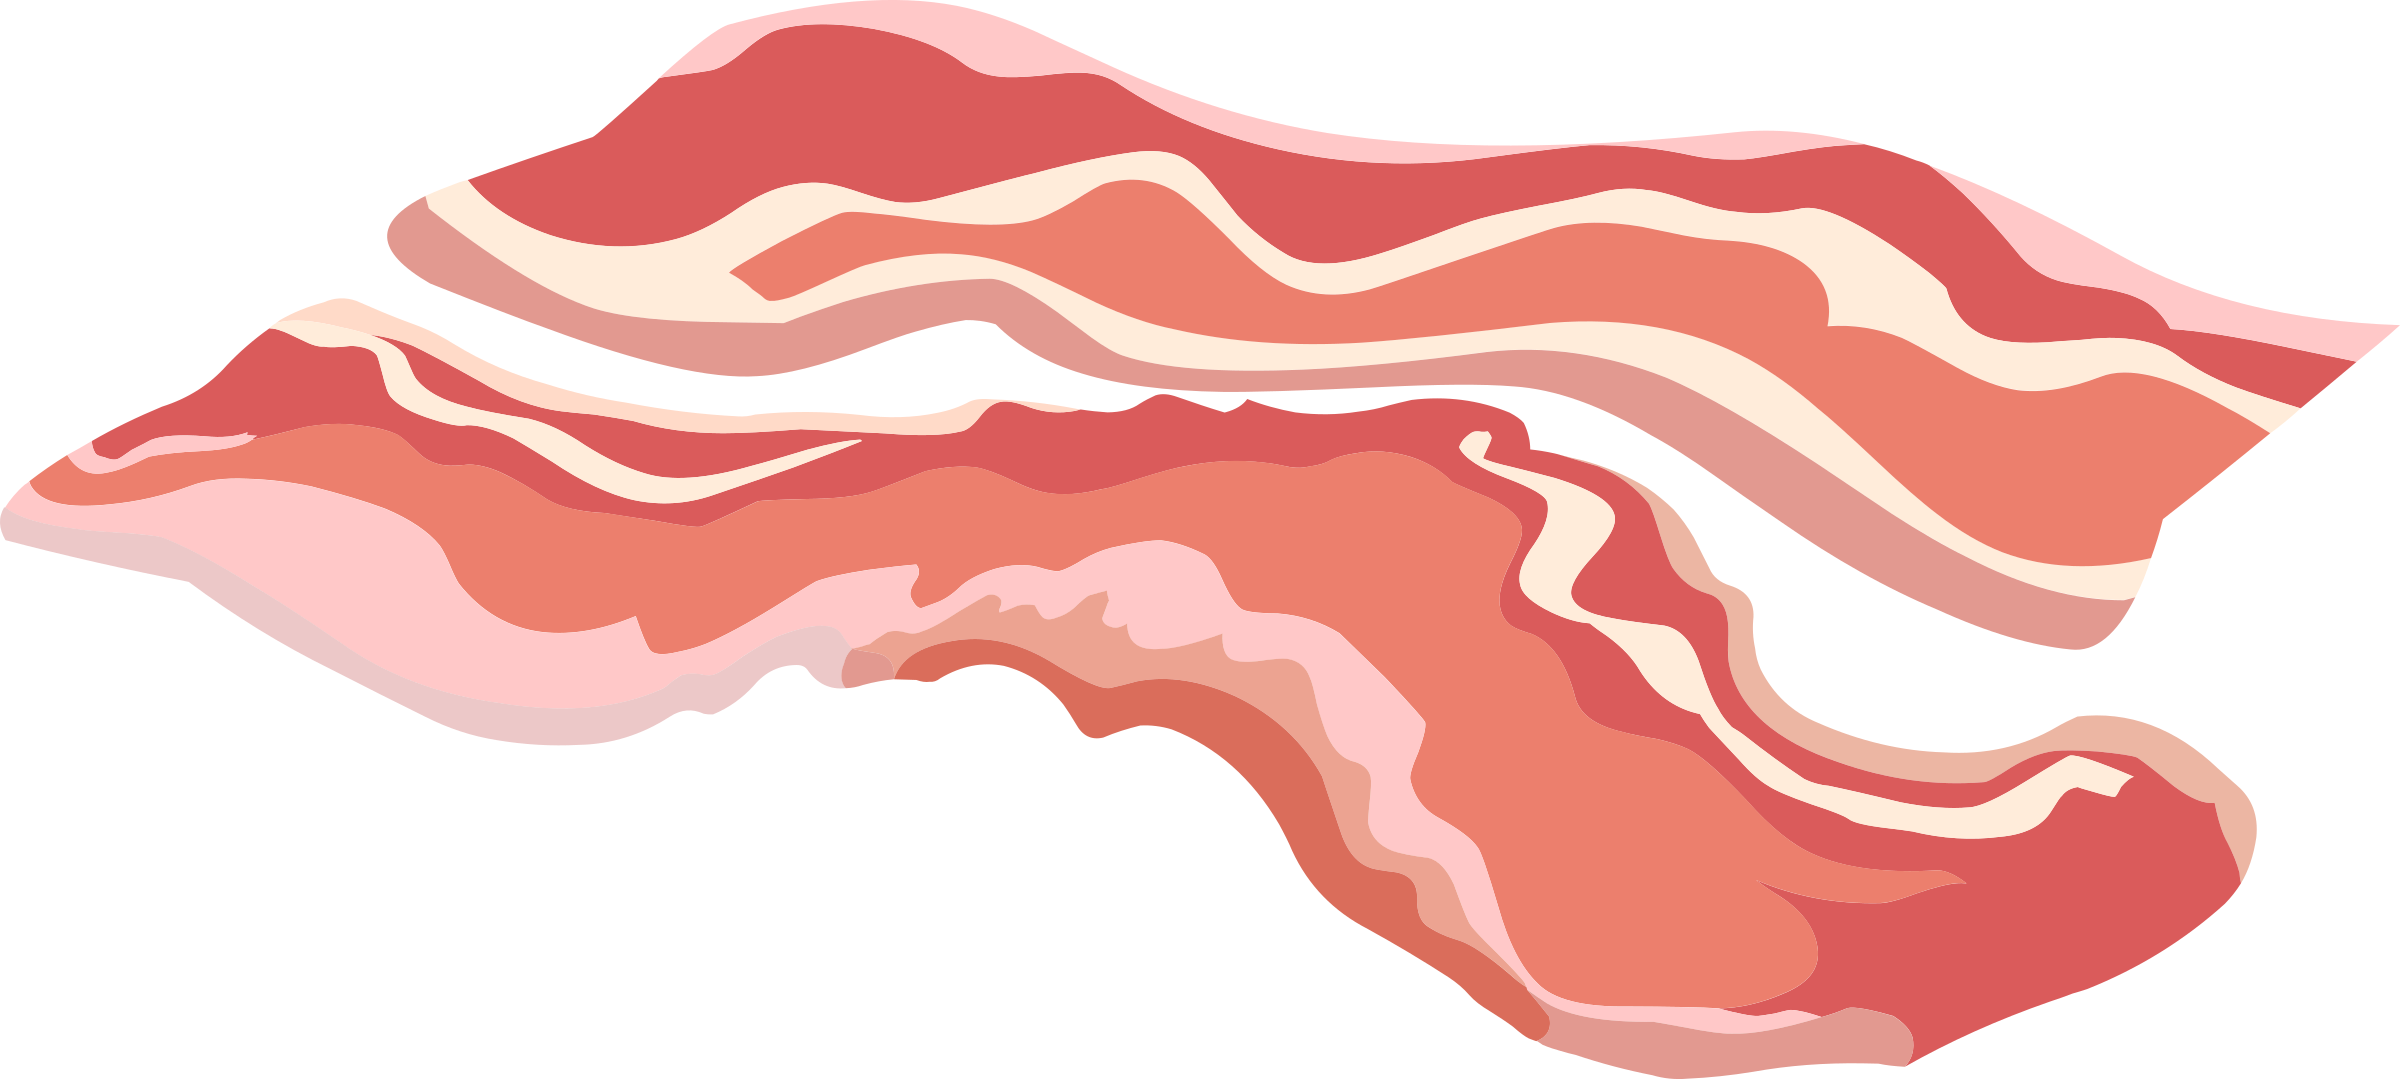 Bacon png images transparent. Background clipart invisible